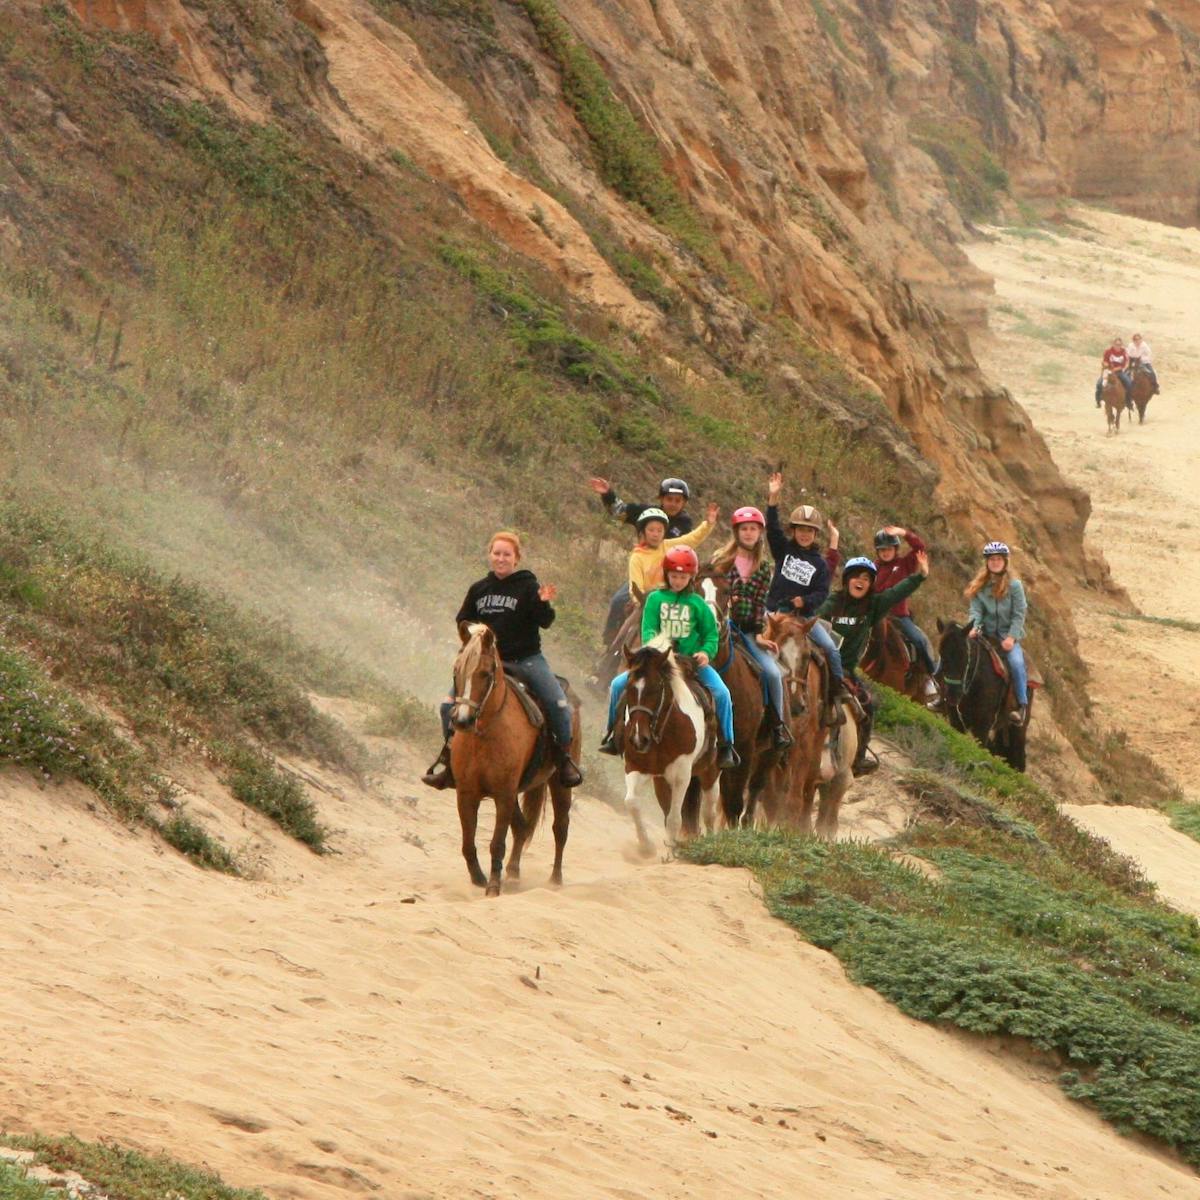 Riders waiving at the camera on a Horse back ride